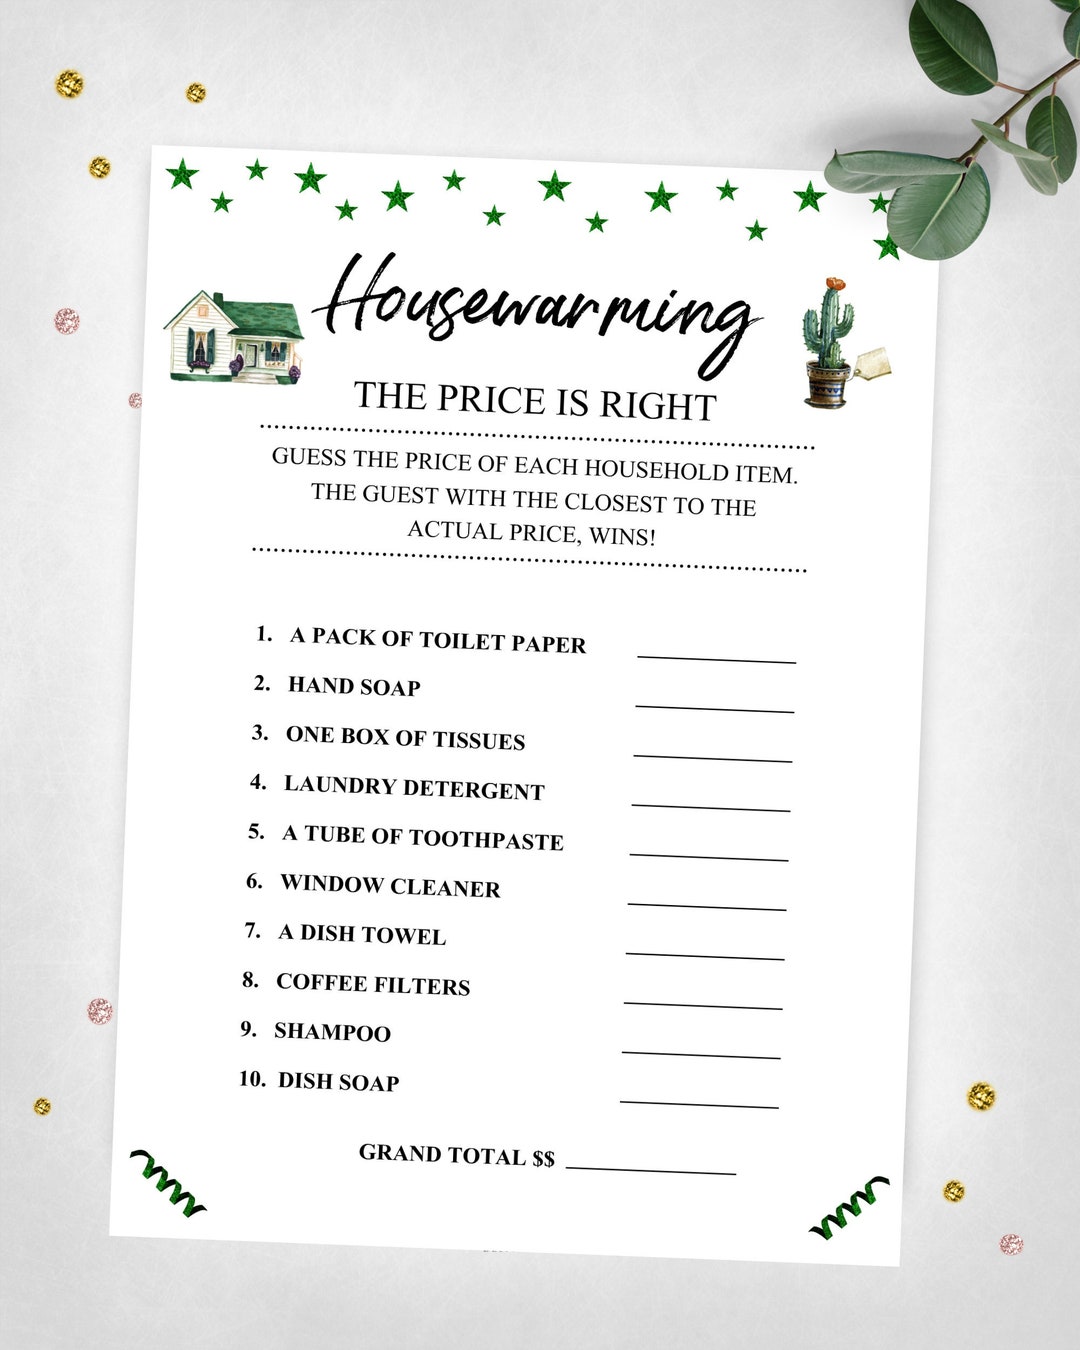 Housewarming Gift Ideas and Free Home Printables - Clean and